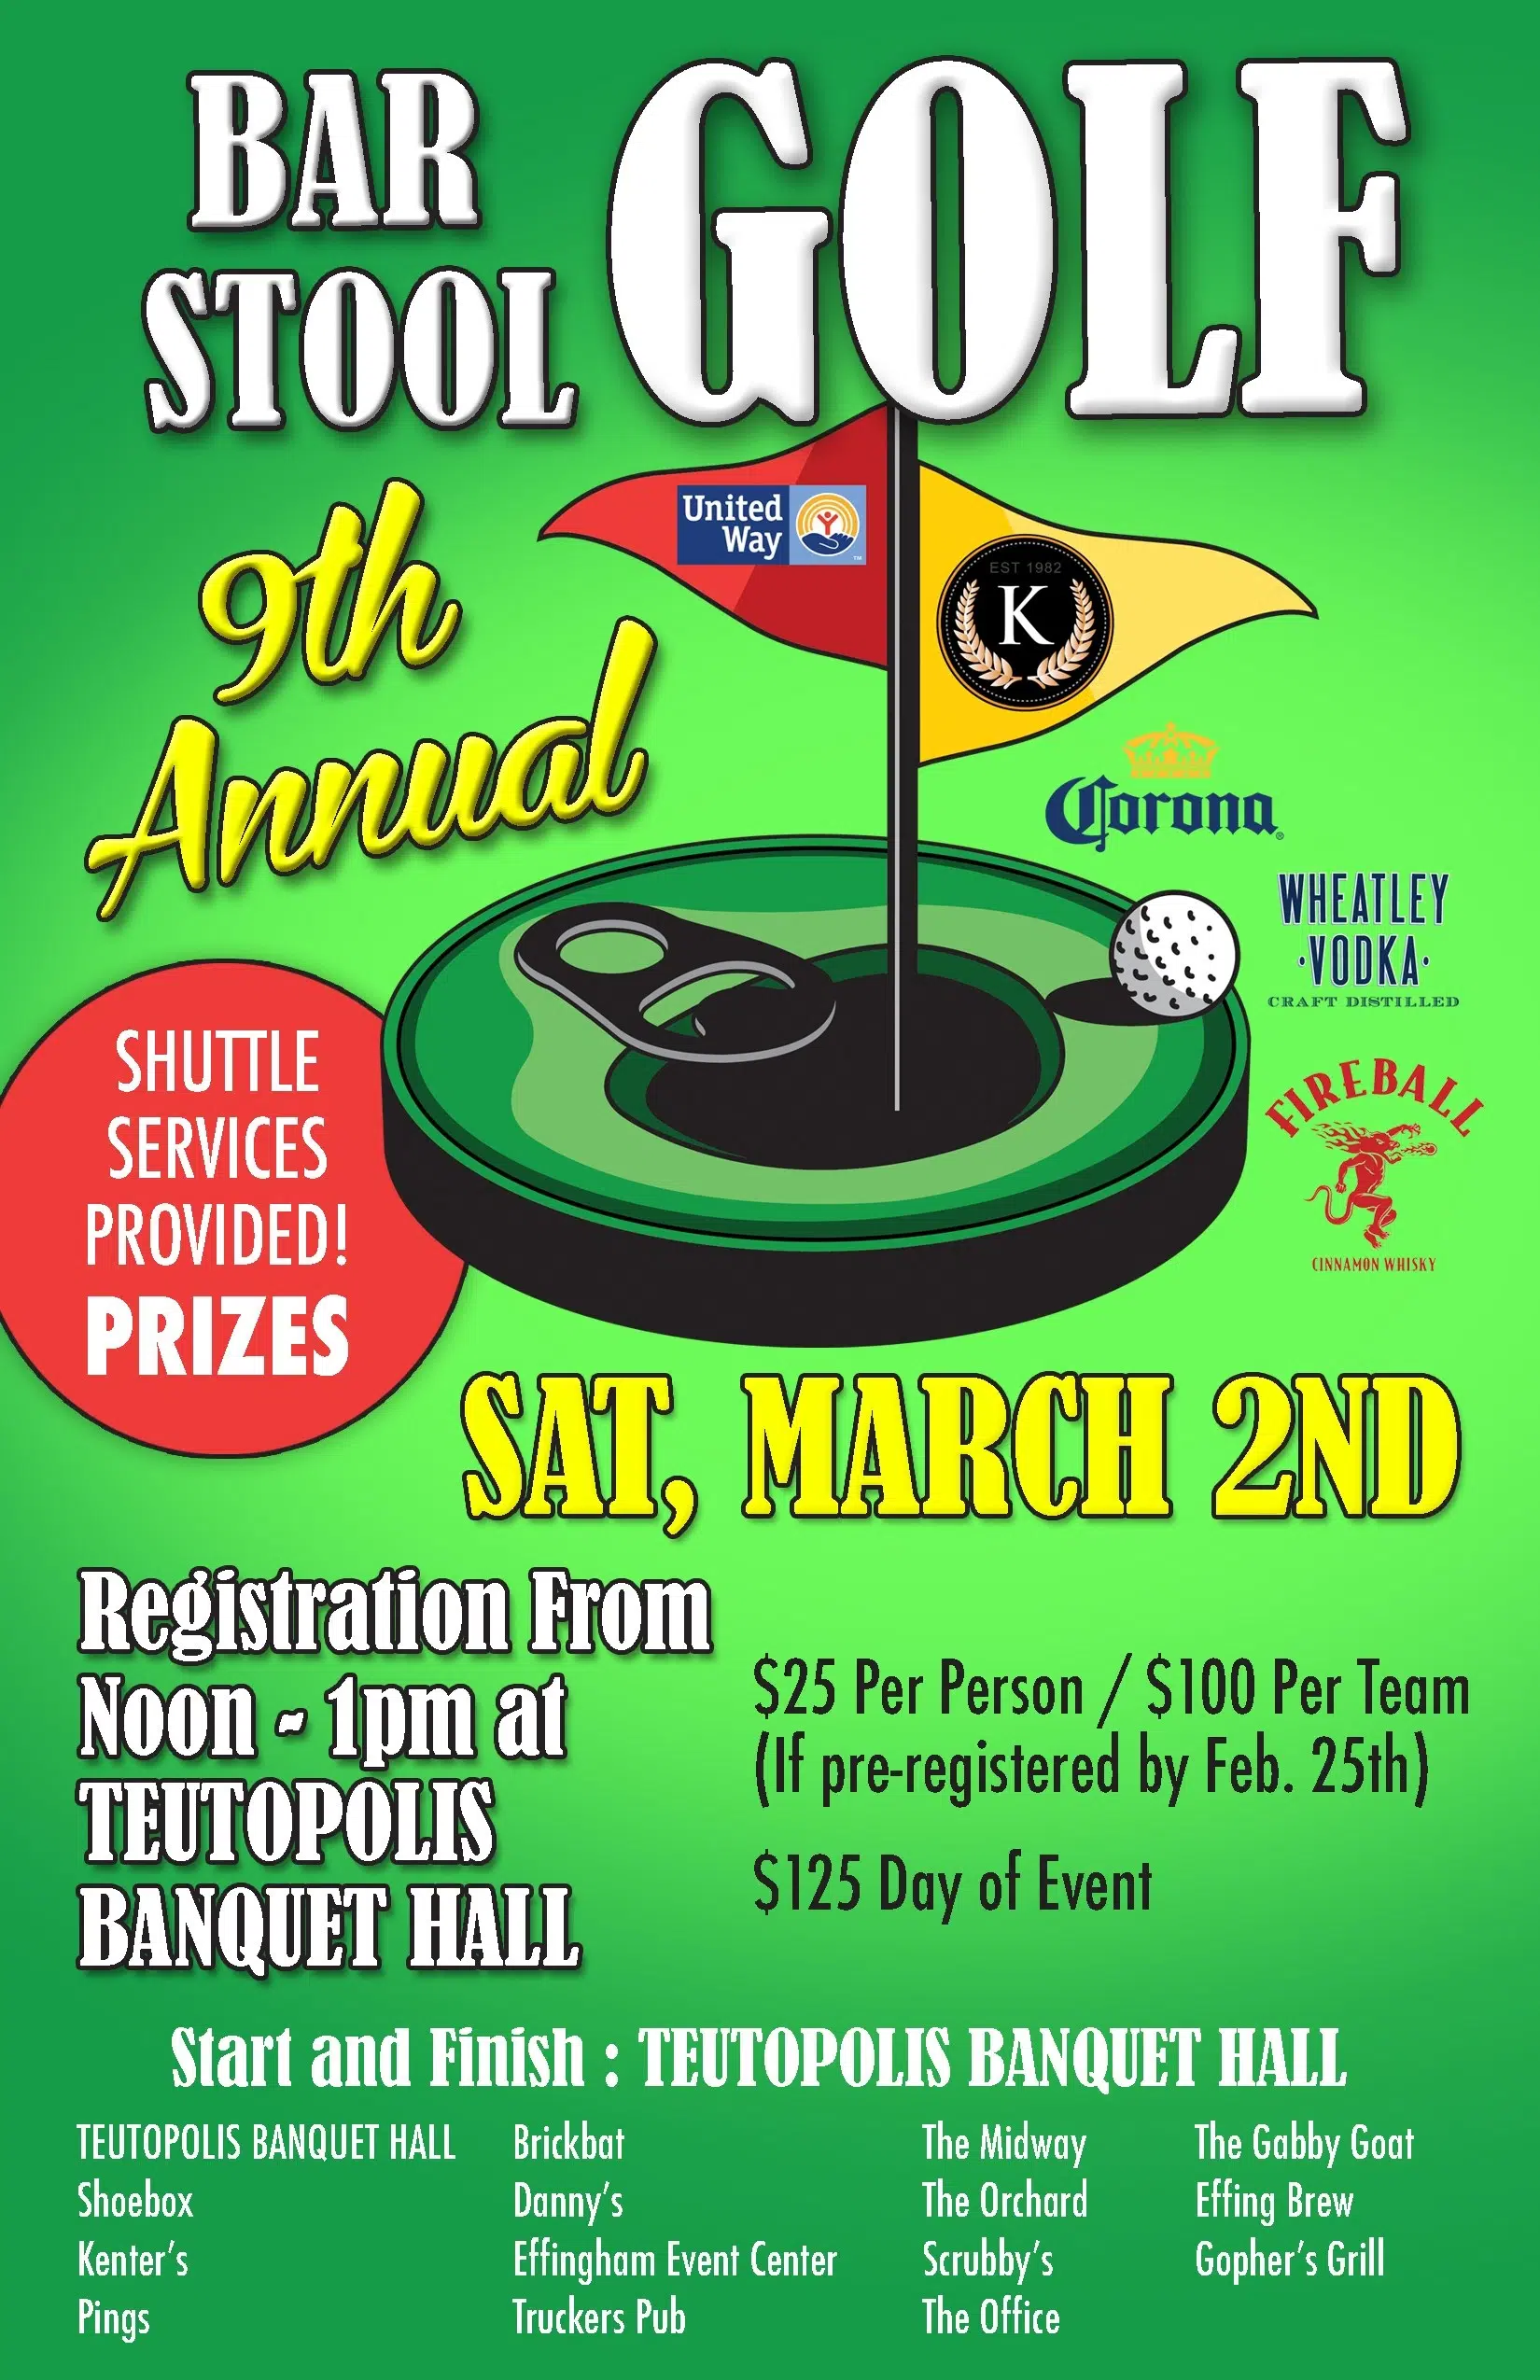 9th Annual Bar Stool Golf to Benefit United Way of Effingham County